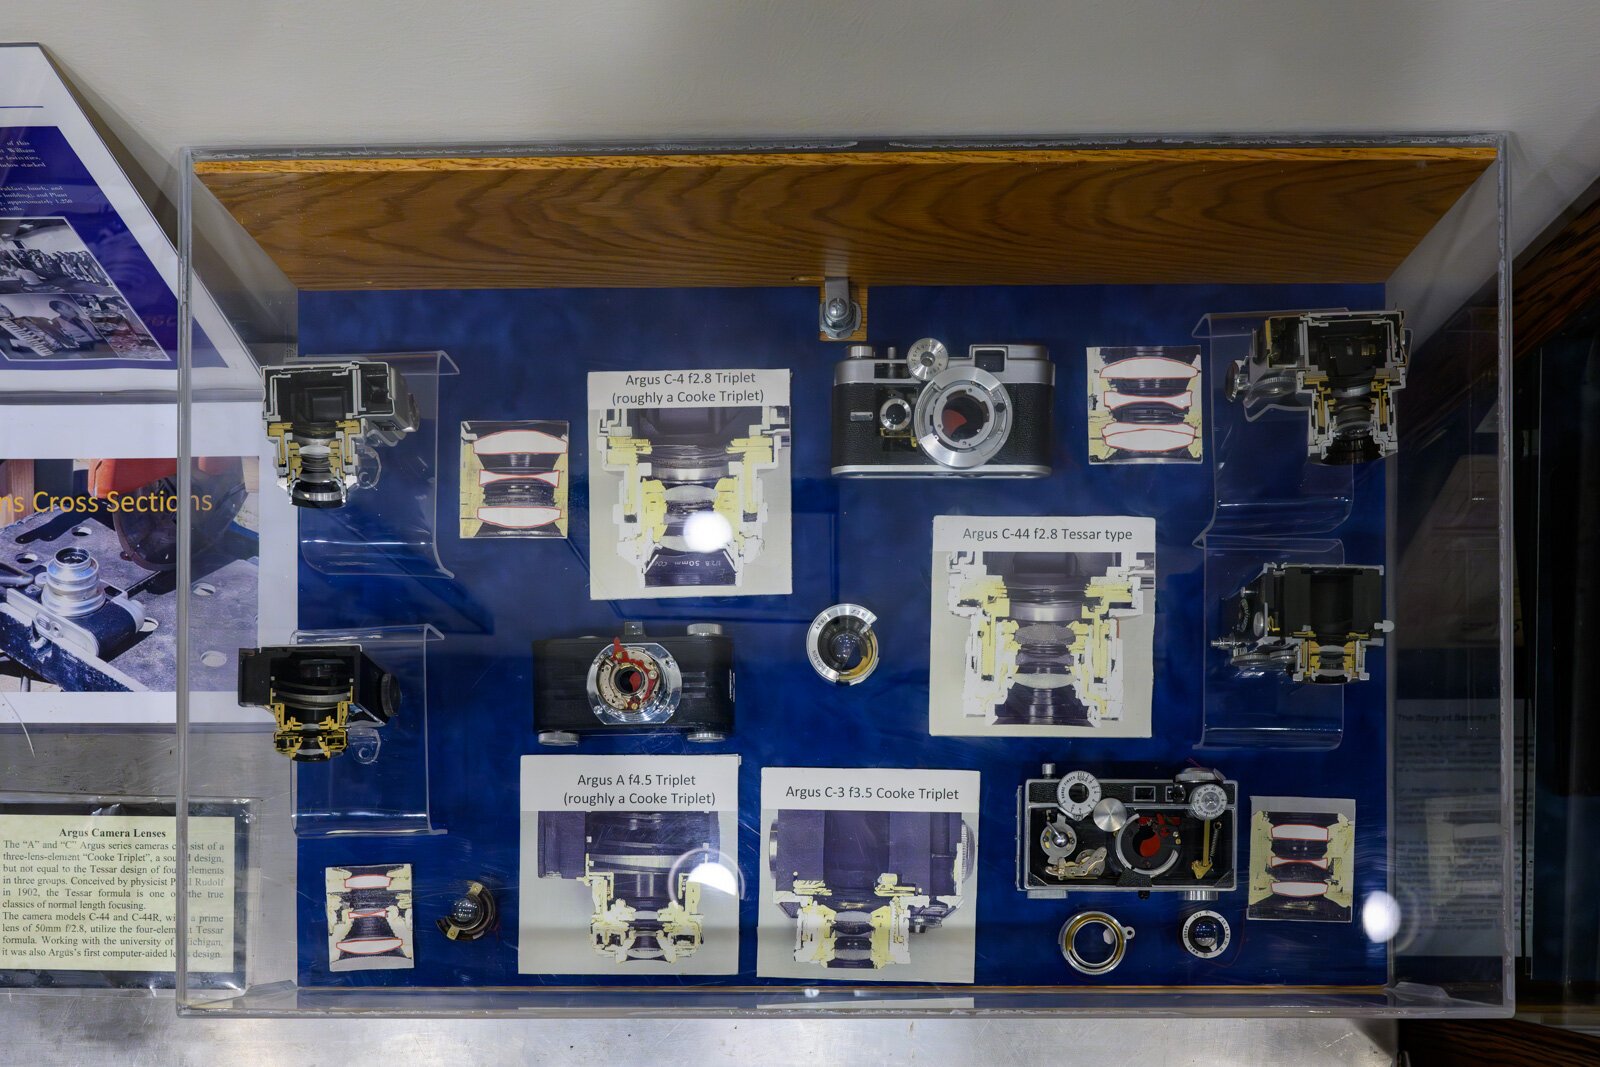 Cutaways of Argus cameras and lenses revealing their design at the Argus Museum.